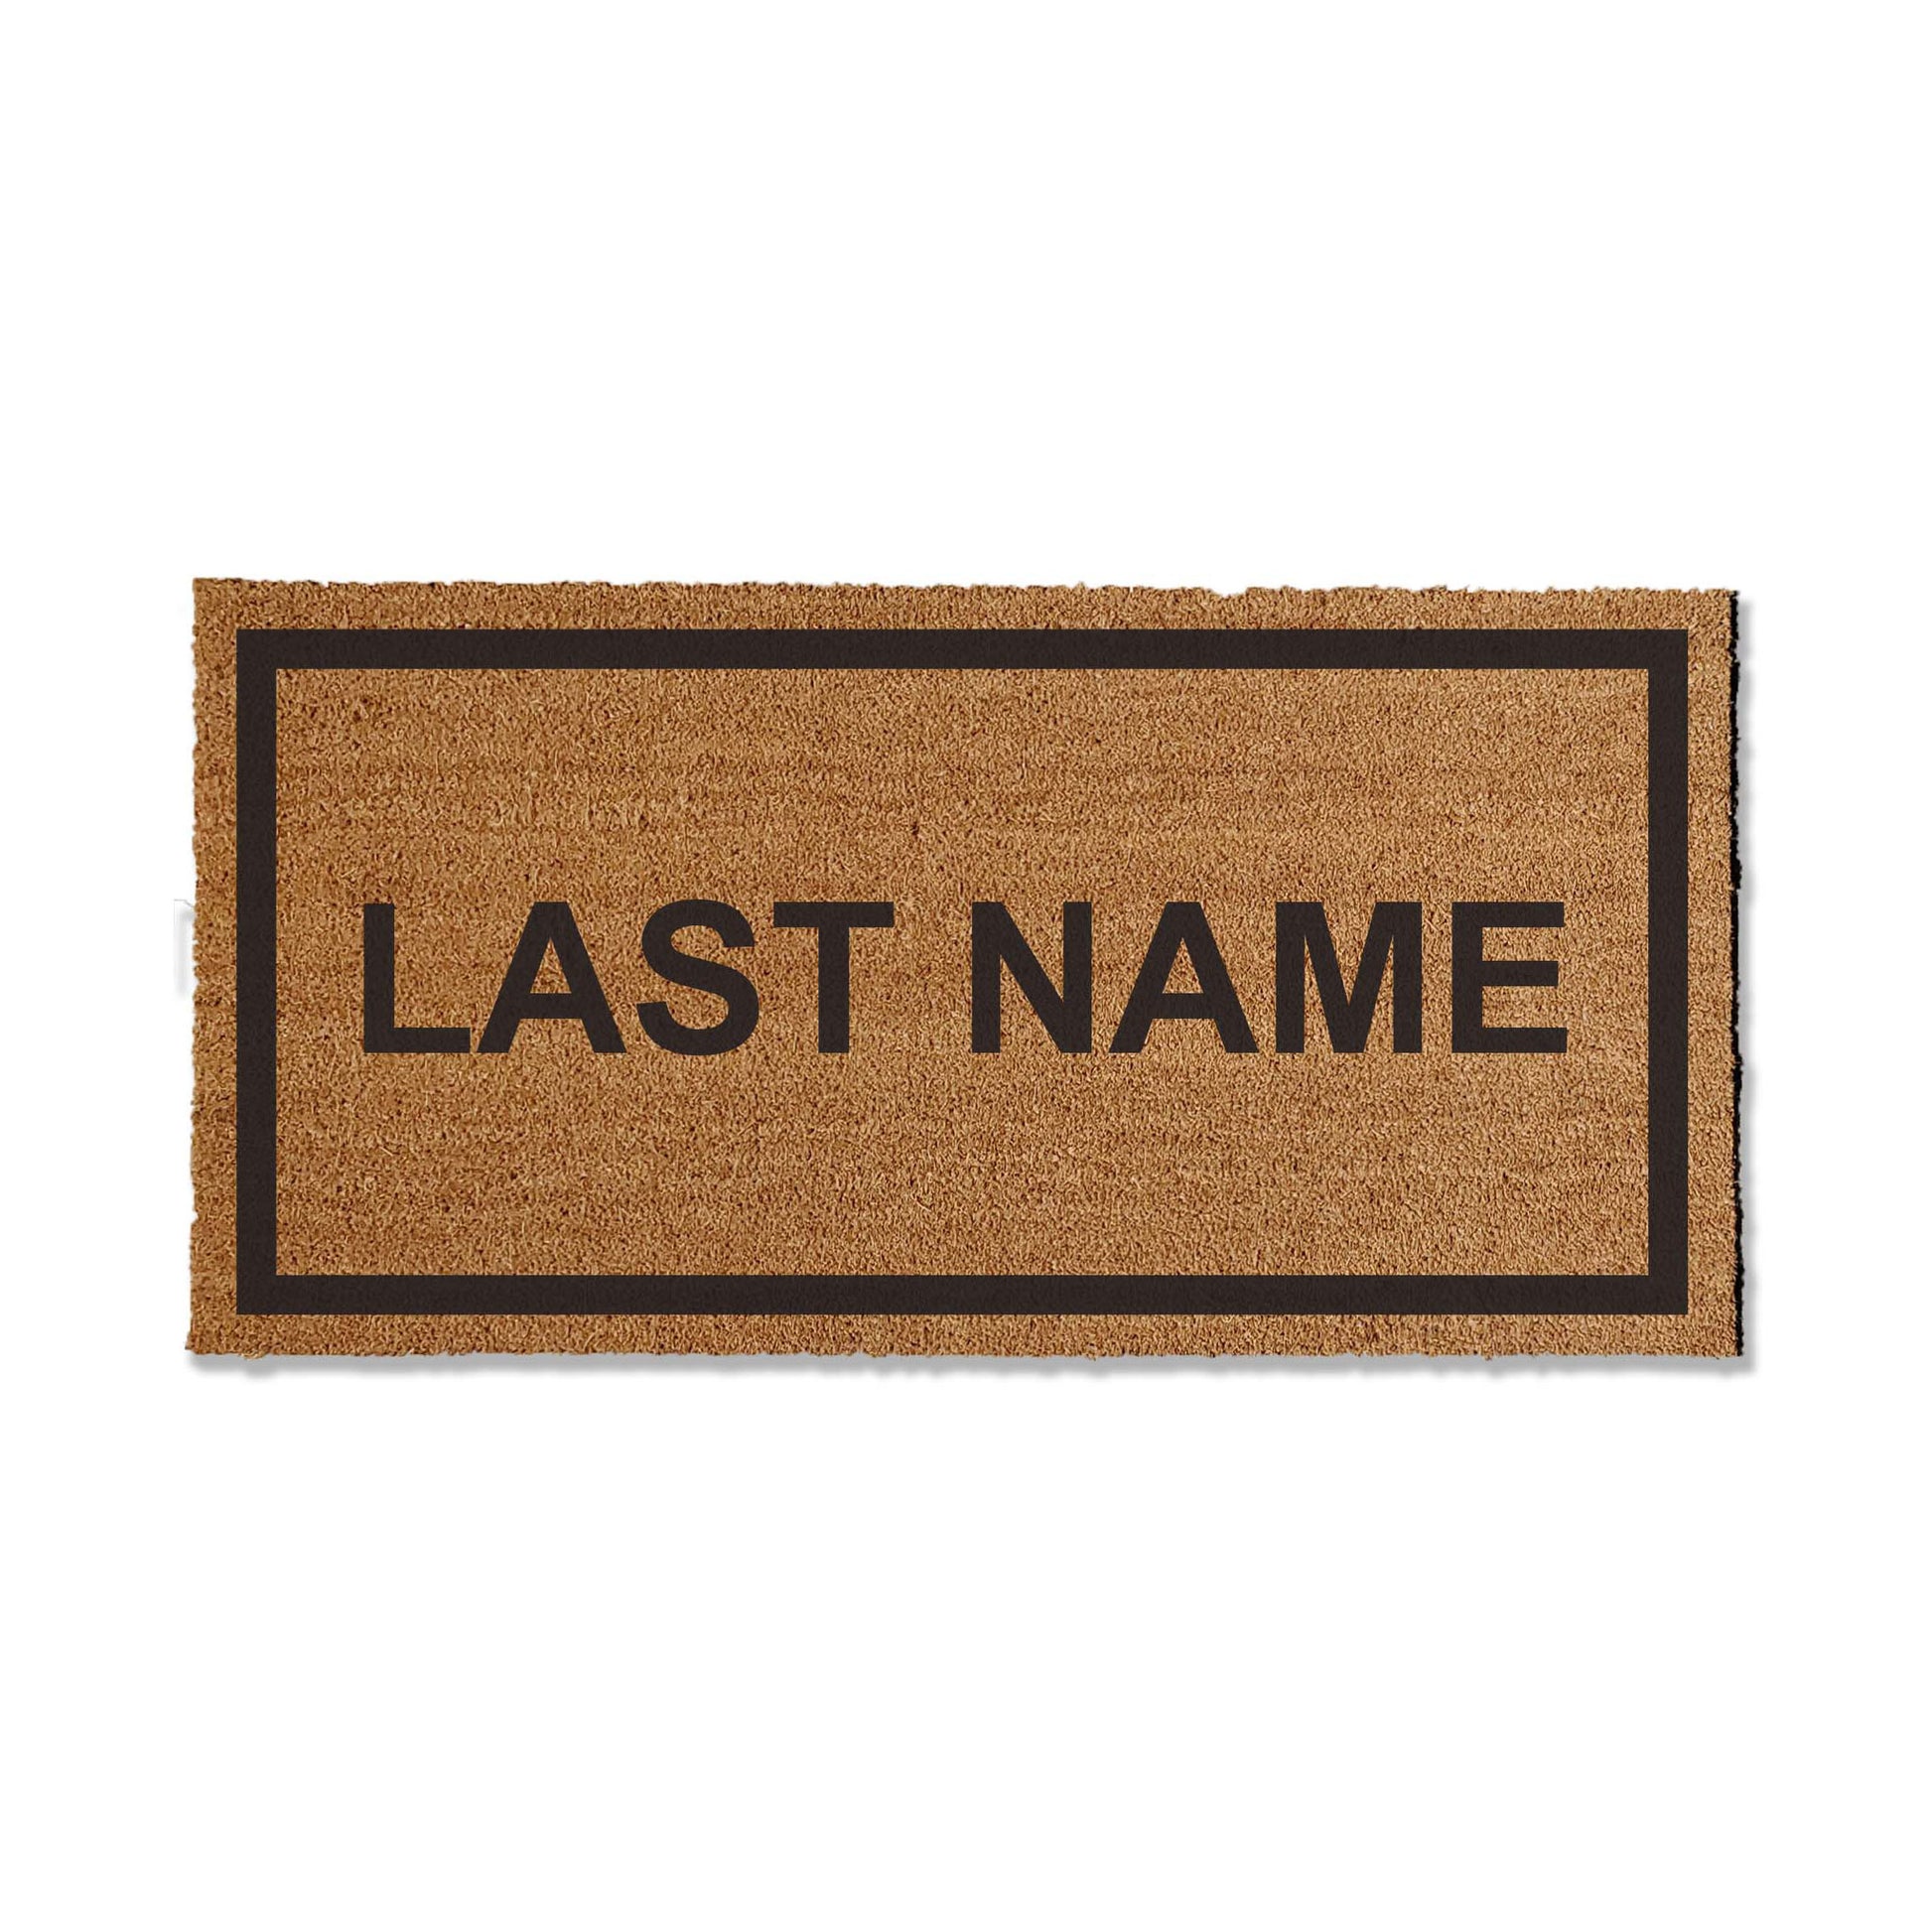 Discover our custom coir doormat, offered in various sizes. Add a personal touch to your entryway by customizing with your last name or a fun saying. These coir doormats excel at trapping dirt, ensuring a cleaner home. Choose the perfect size to complete your entryway with style and functionality.